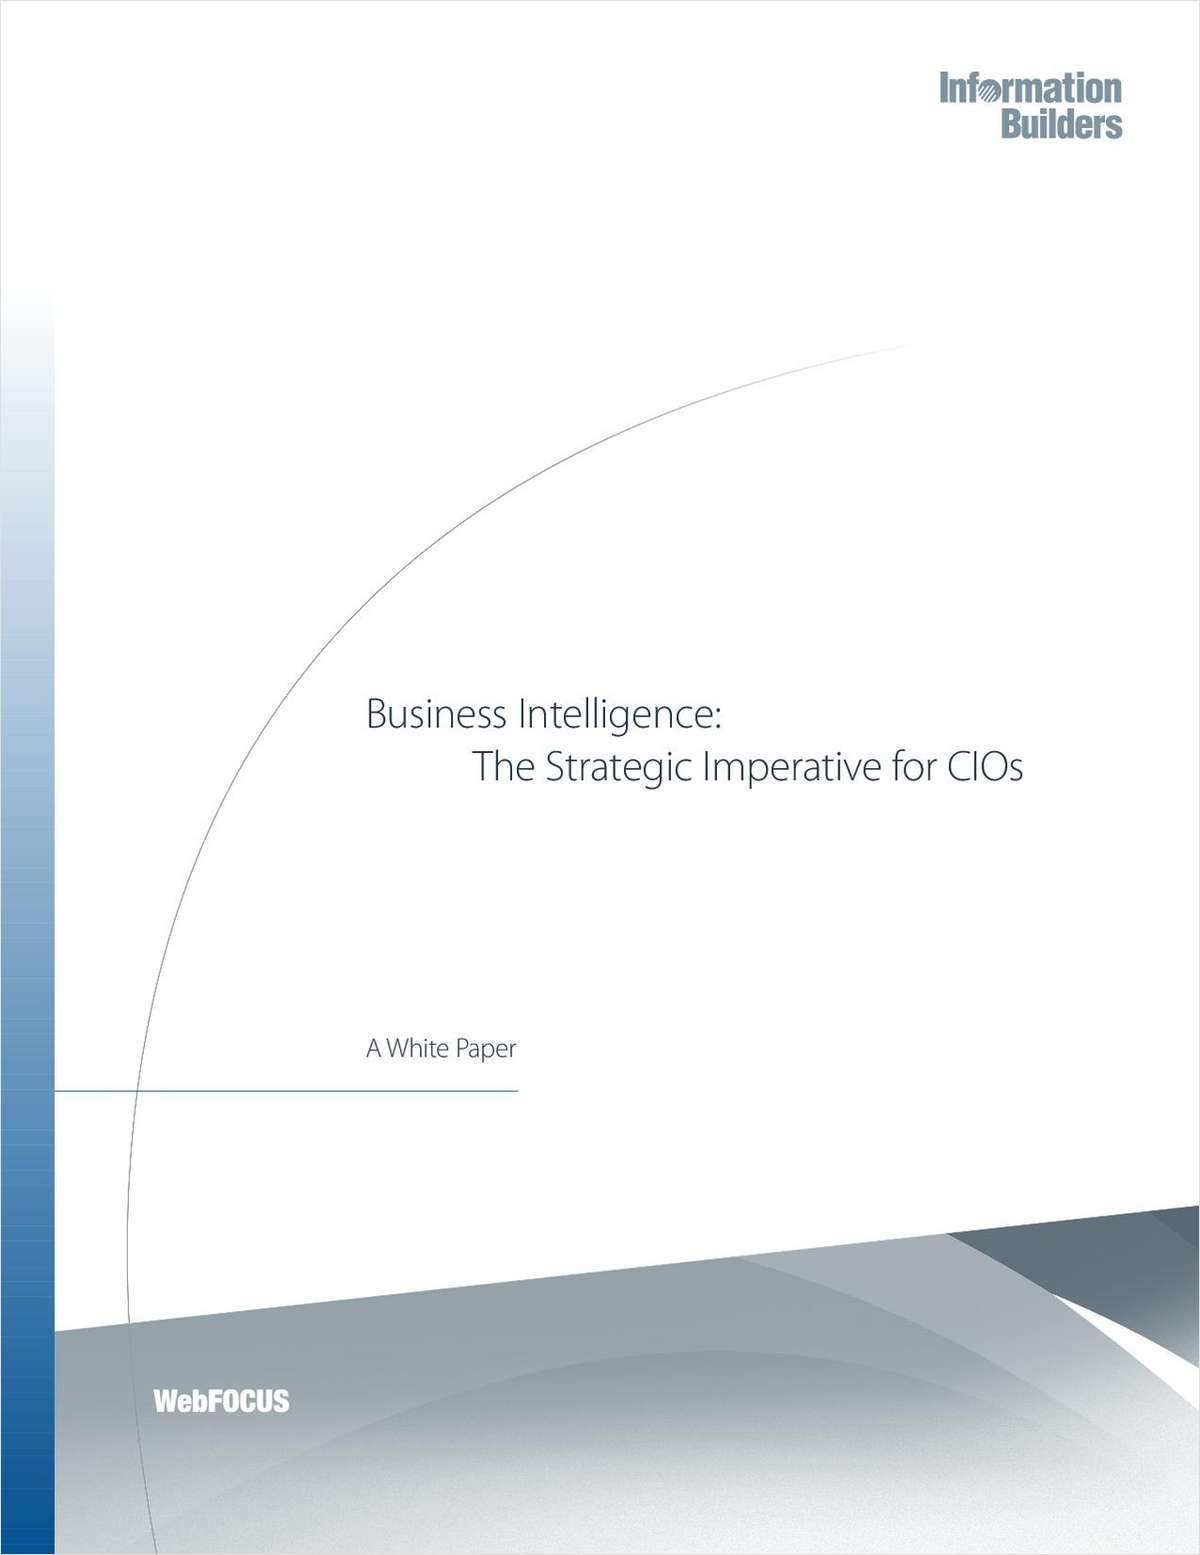 Business Intelligence: The Strategic Imperative for CIOs